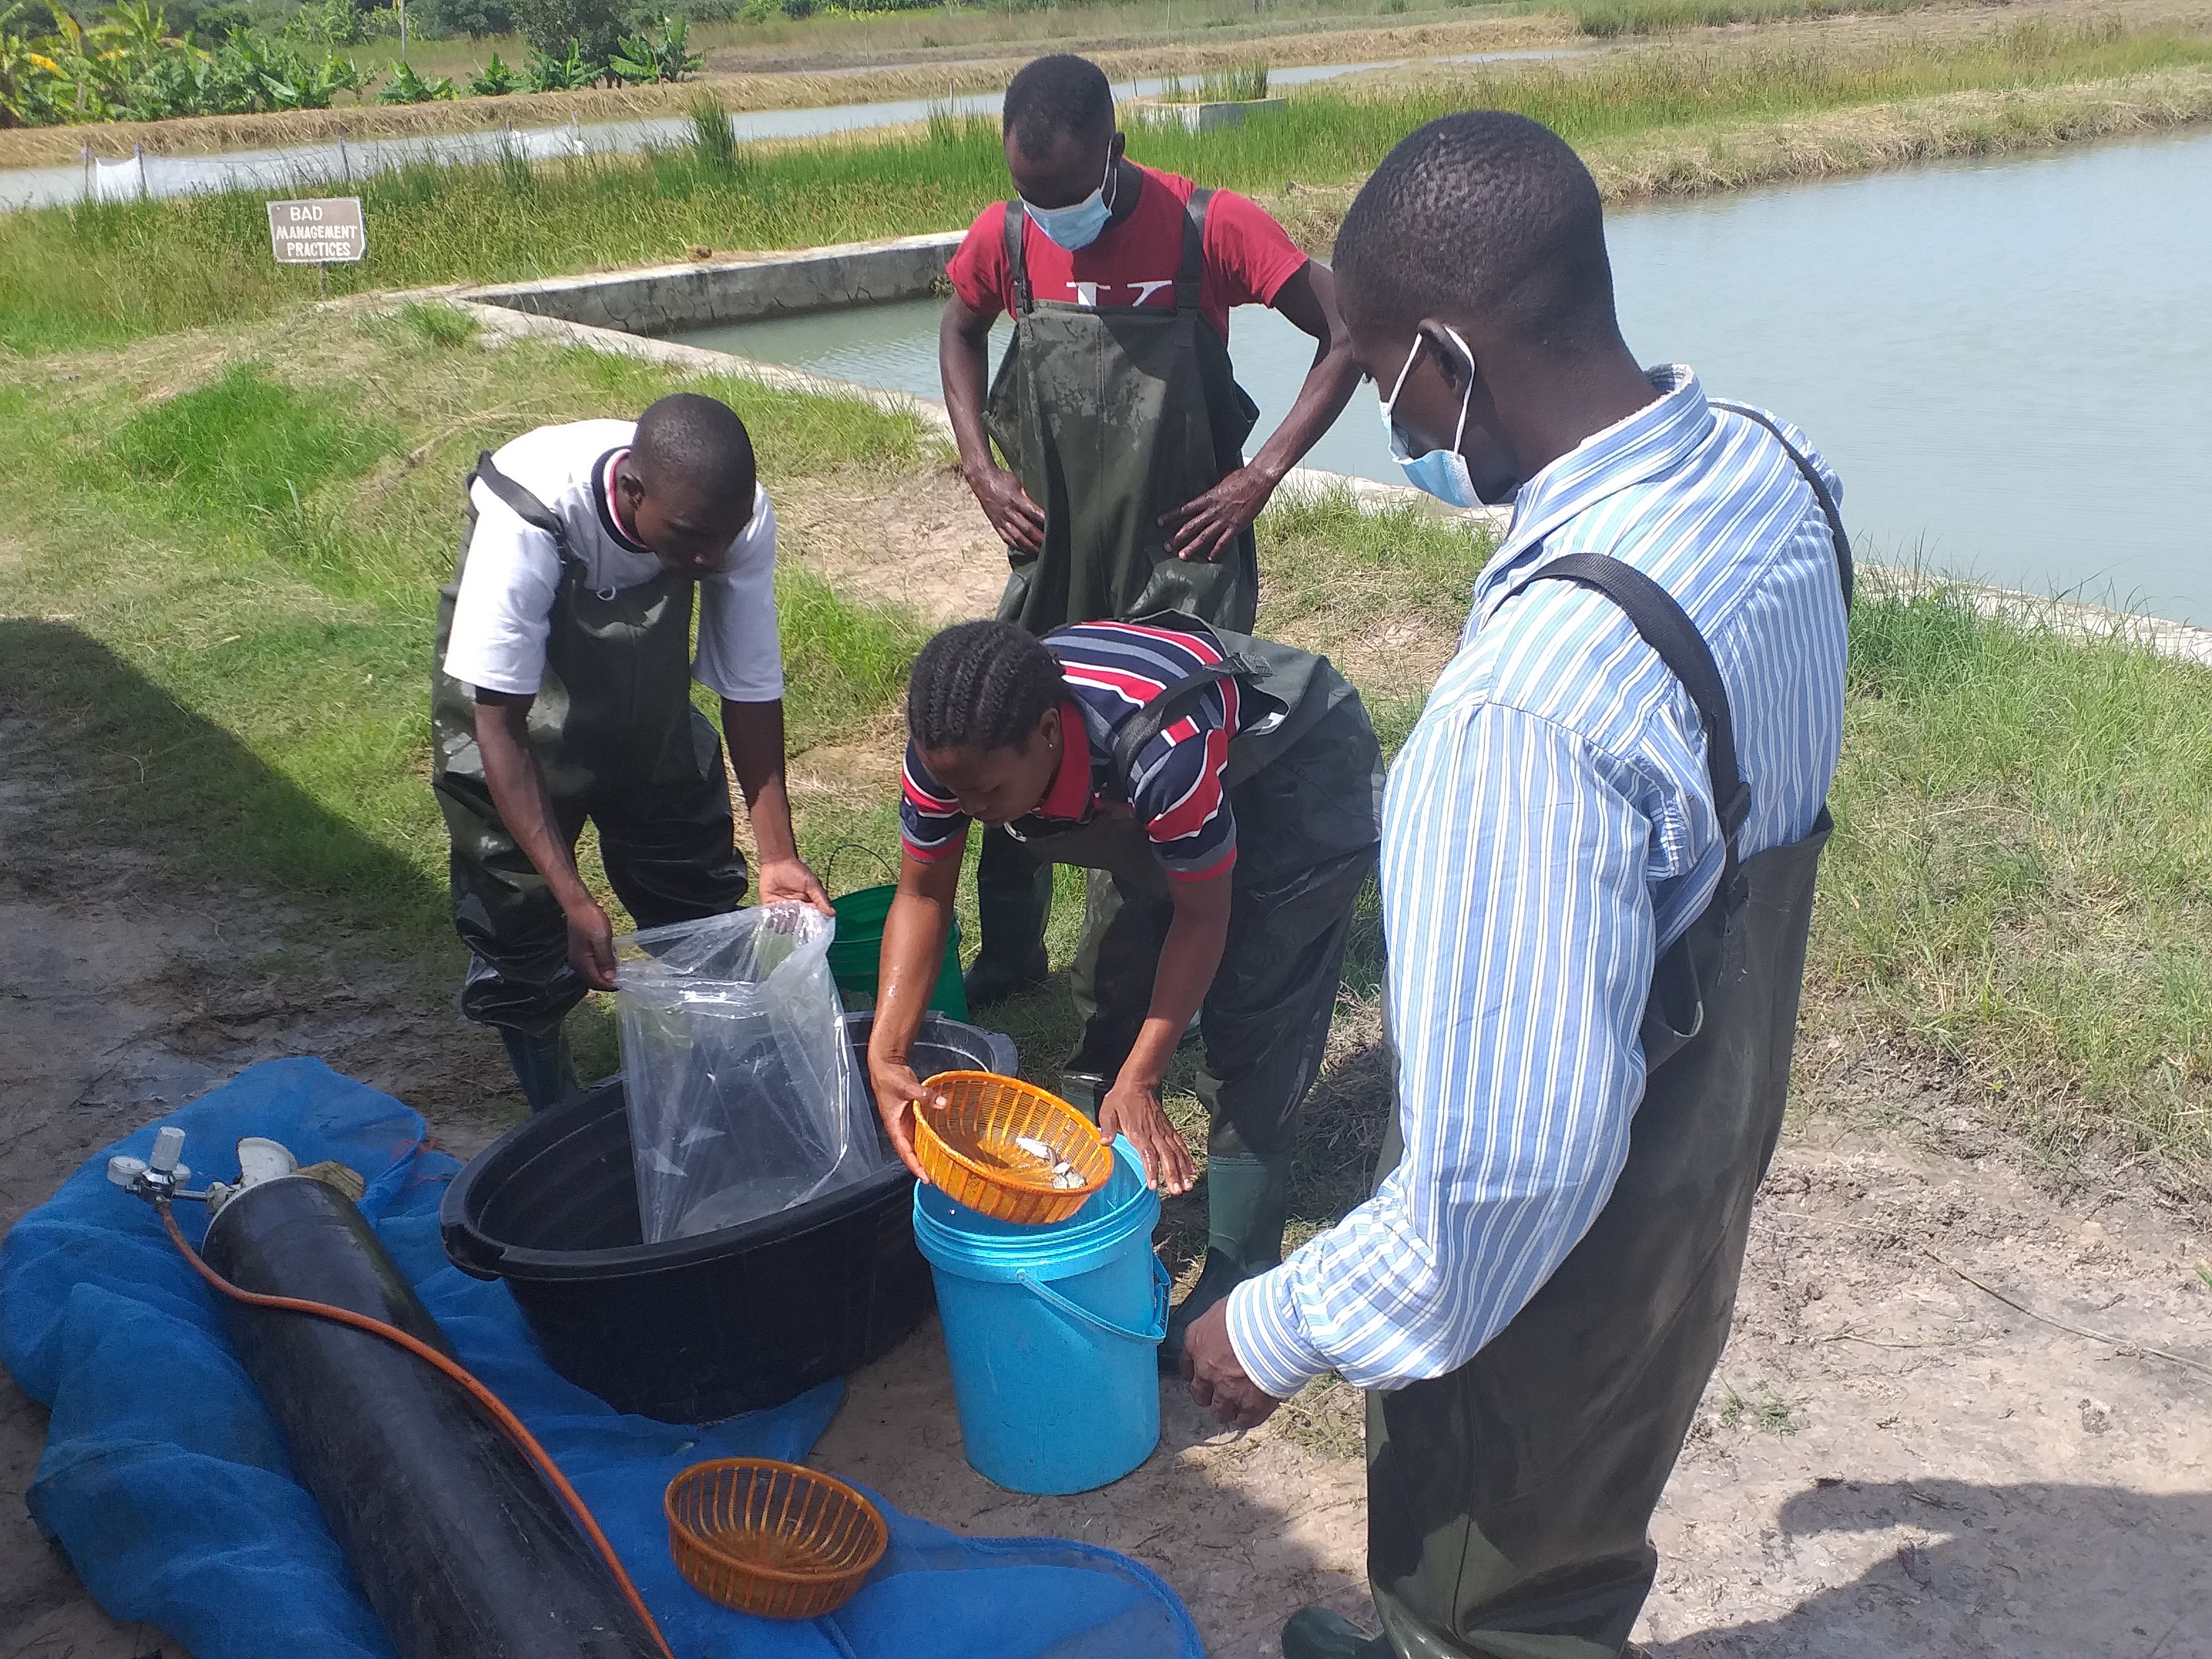 Hellen Chama of Hopeways Fish Farms (center) guides the team in packaging fish fingerlings to be sold to farmers. Photo by Agness Chileya.